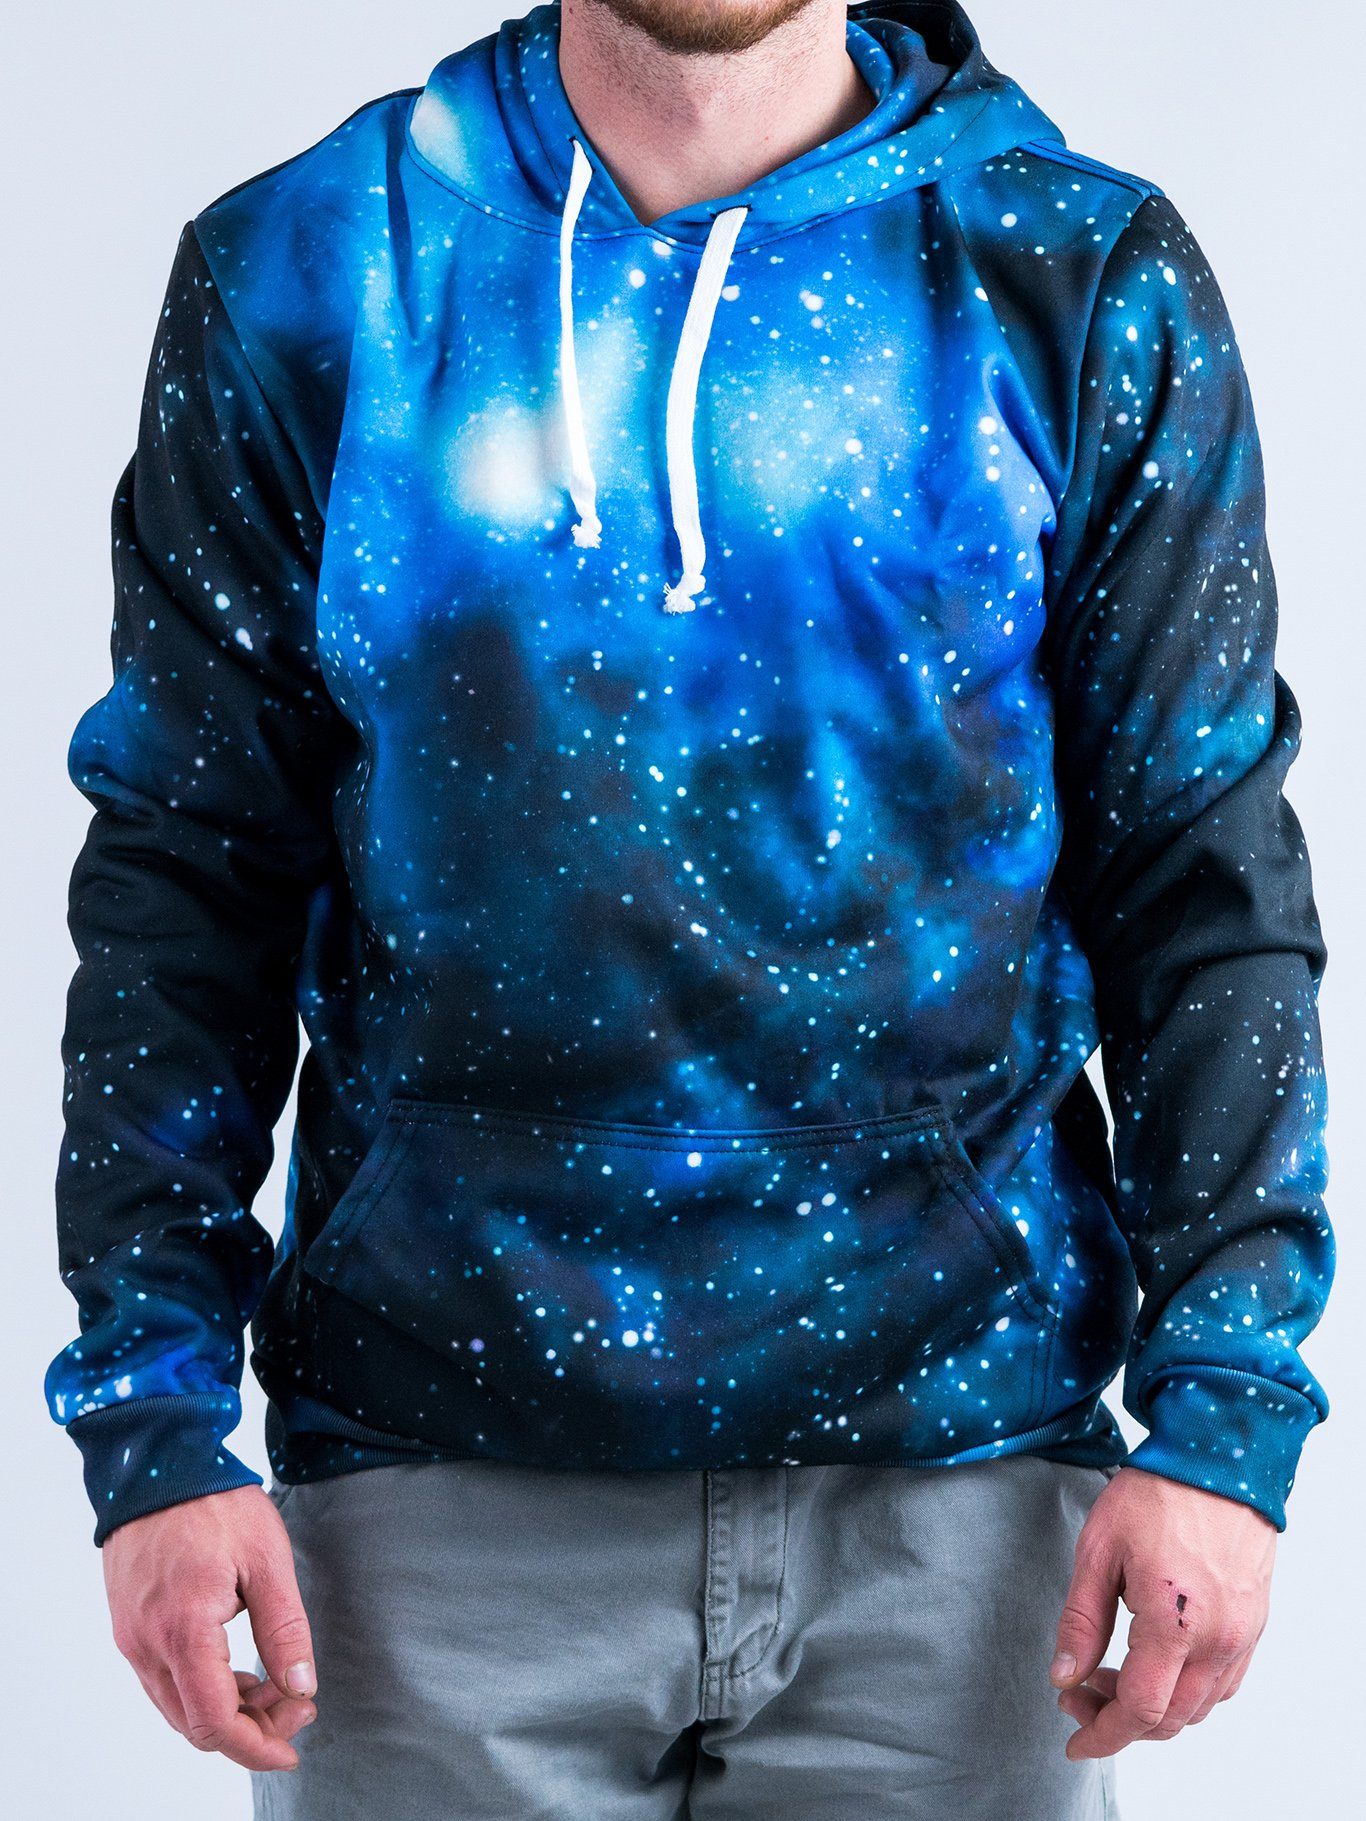 So I bought the scuba hoodie in that pretty galaxy print and ITS